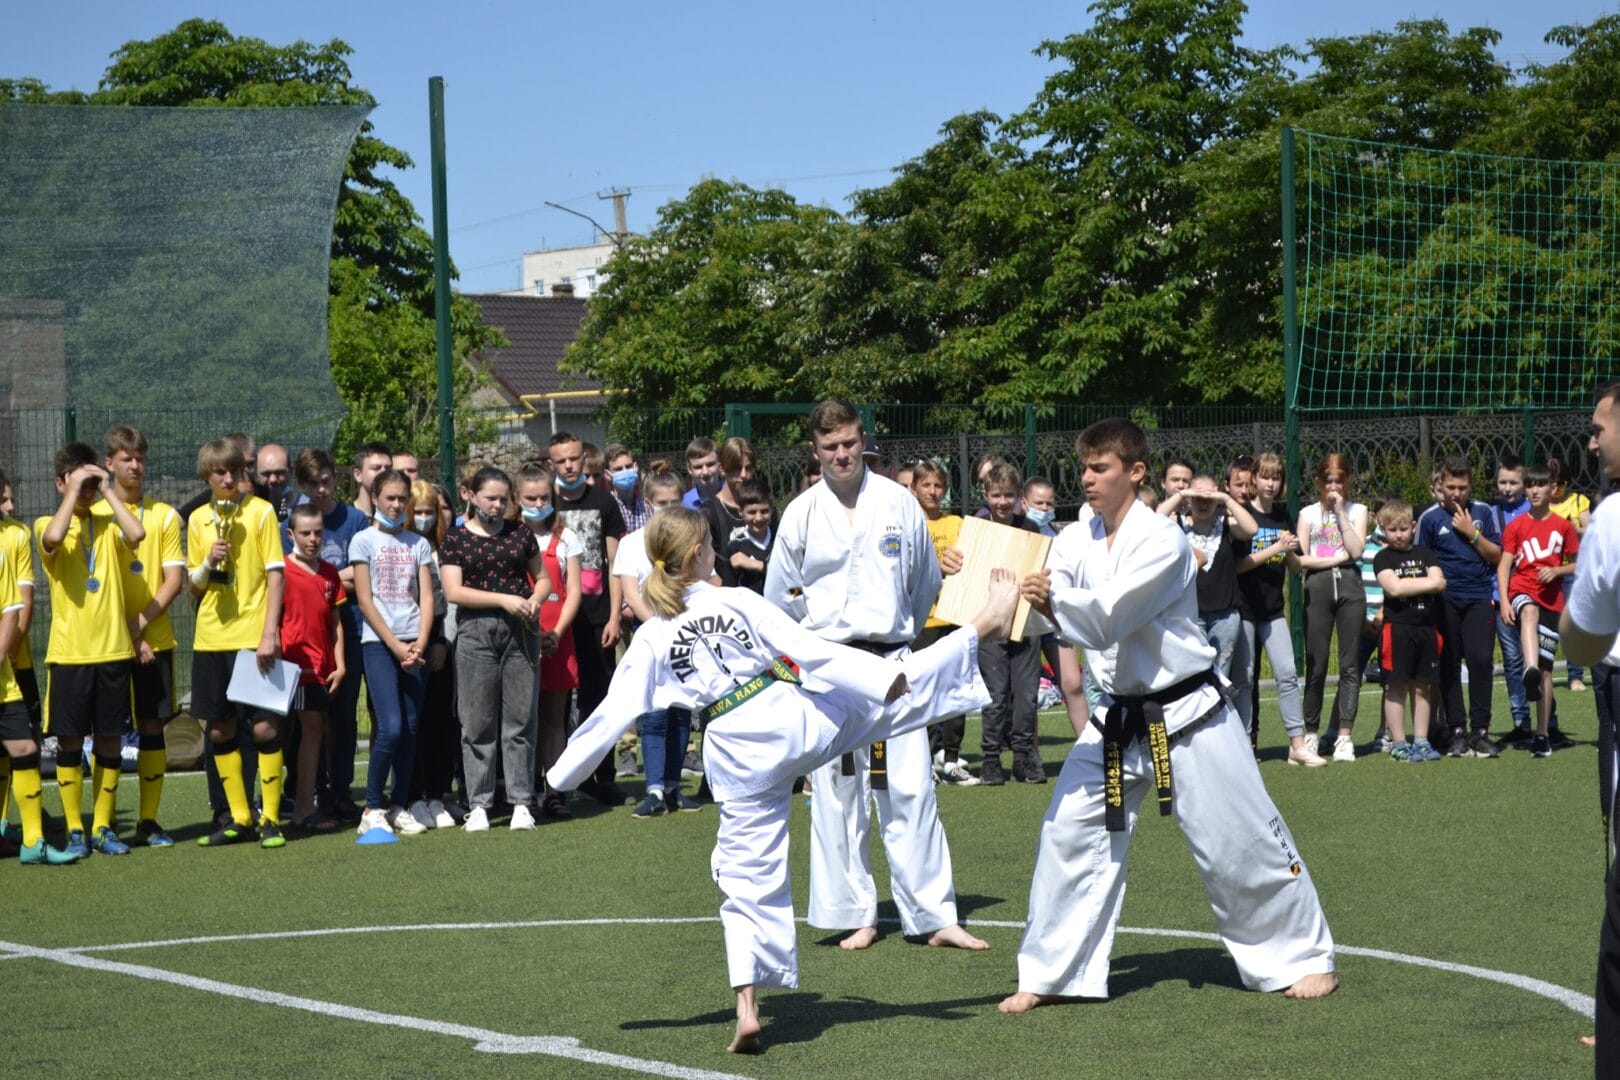 Sports competitions held in the Community